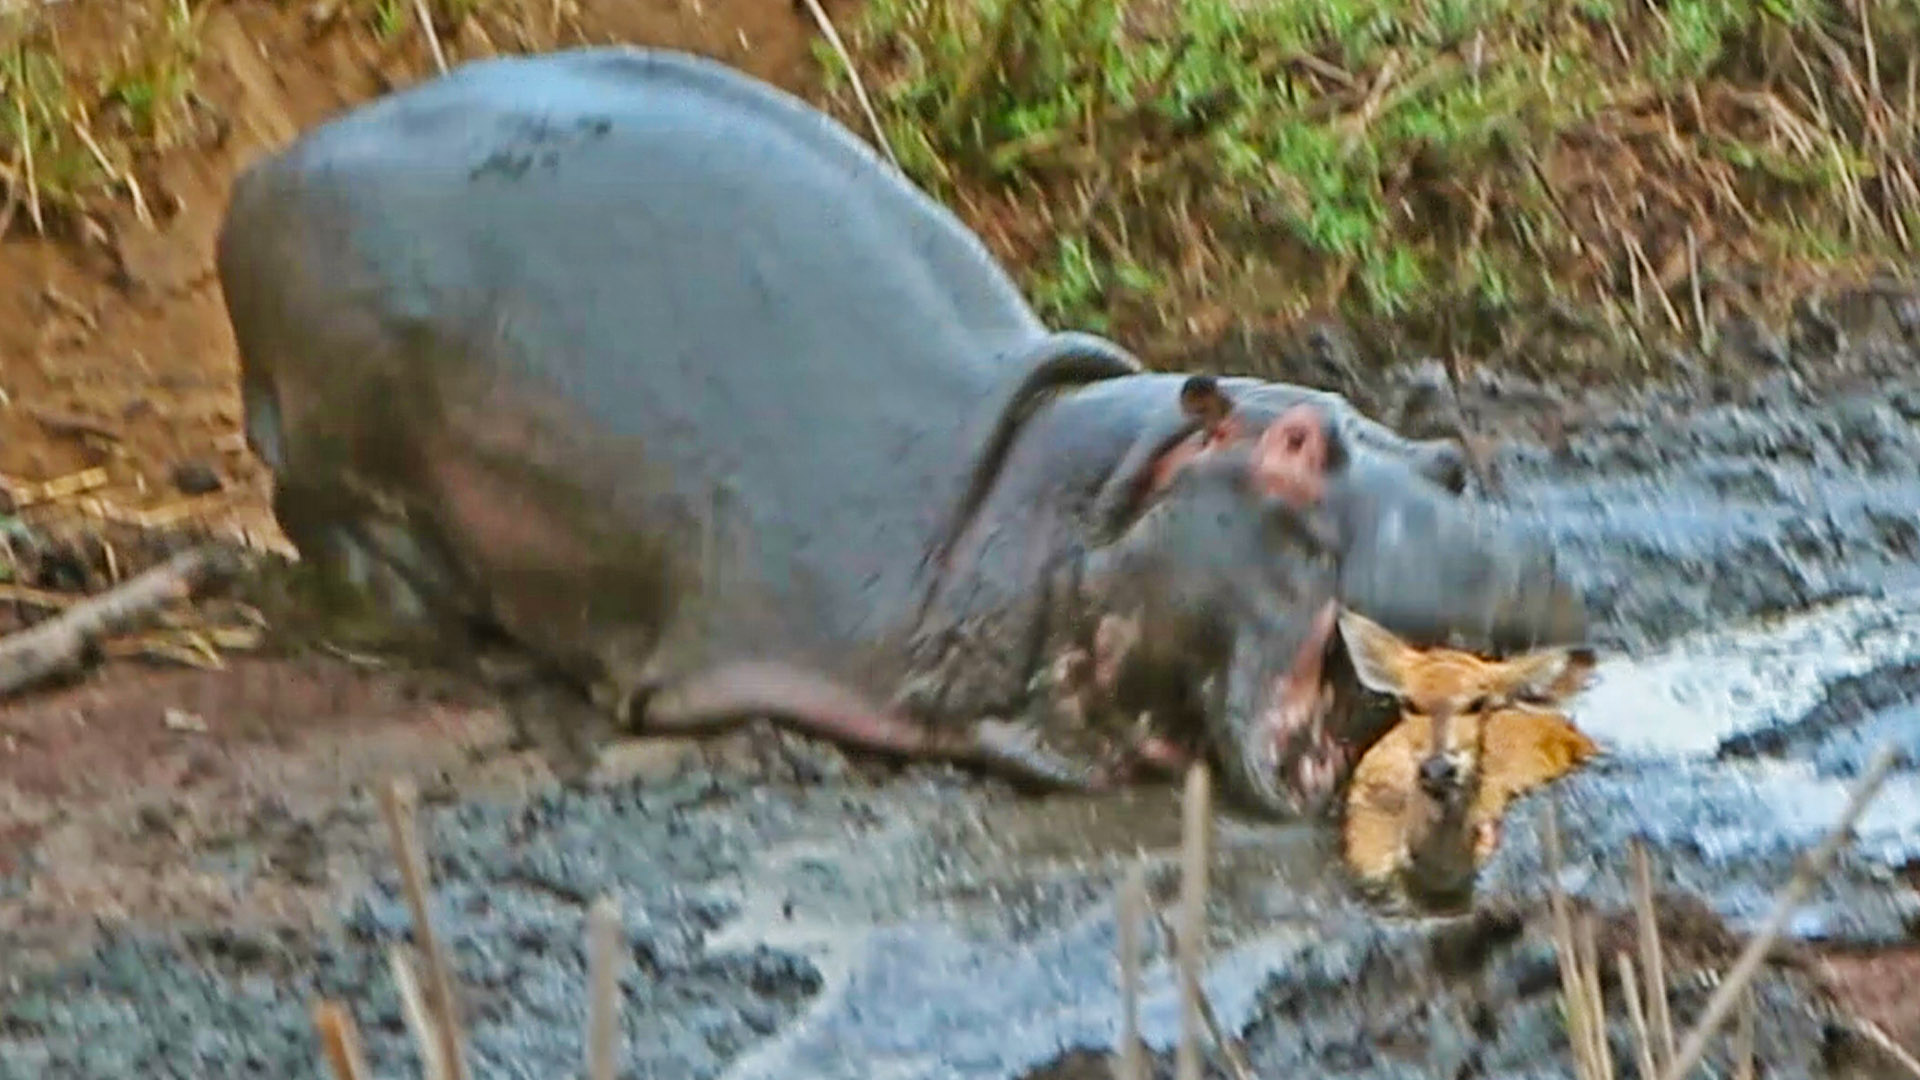 Hippo Crushes Buck That’s Stuck in Mud After Wild Dogs Chased It